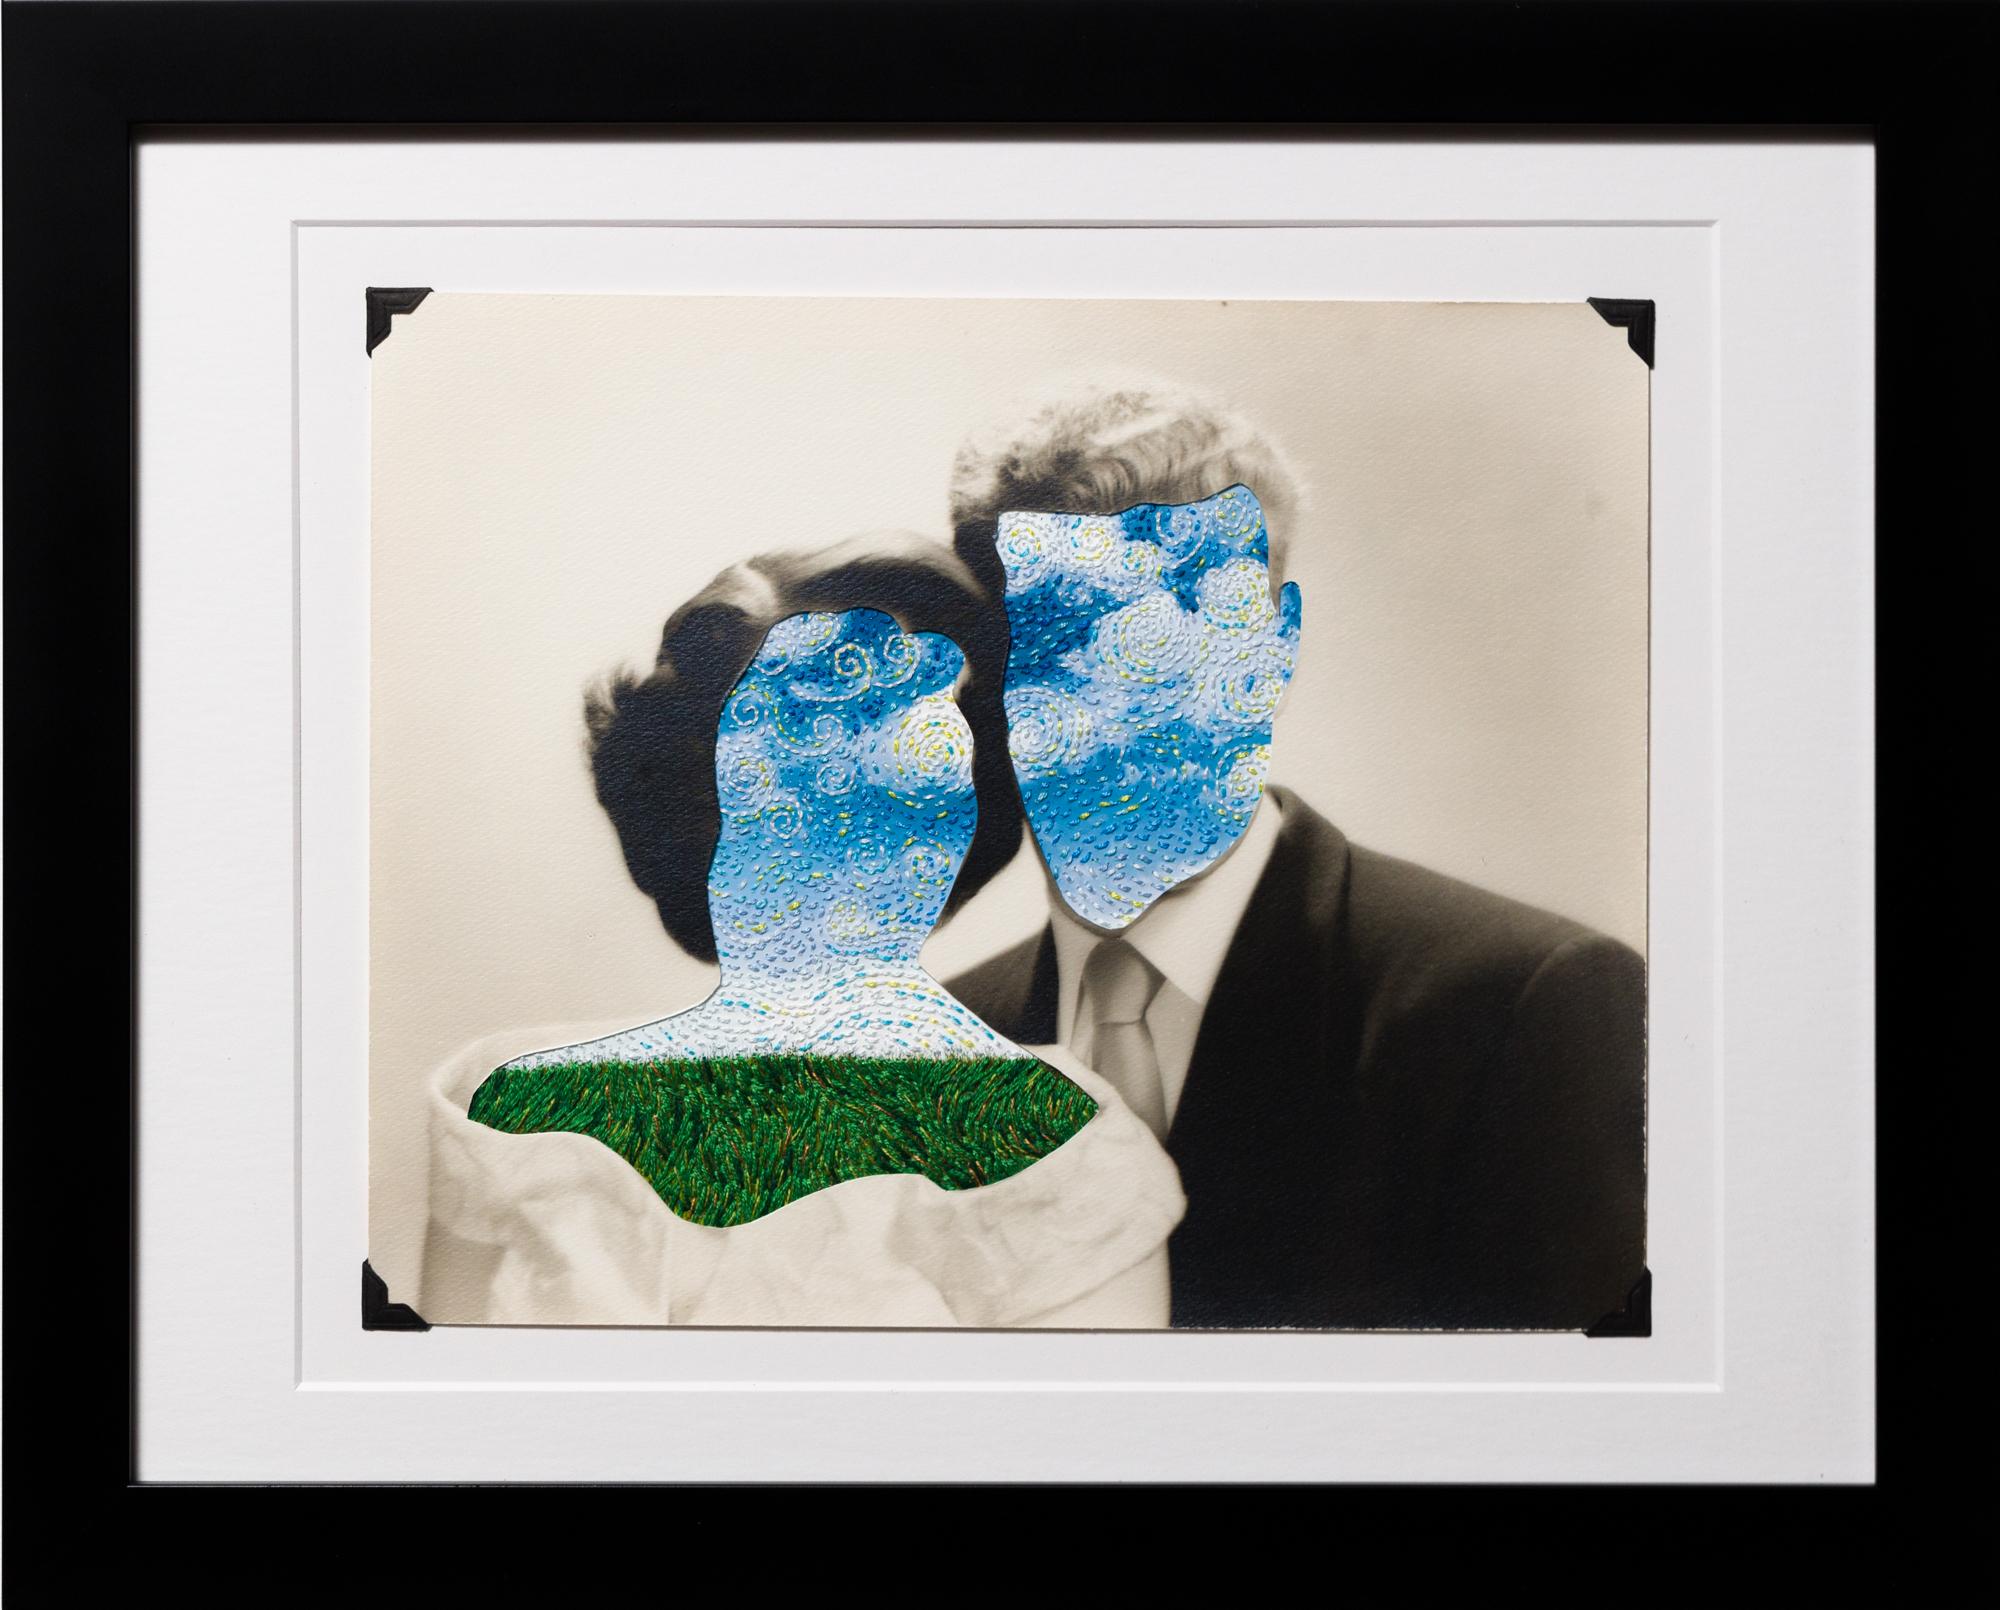 "The Sky-Crossed Lovers" Figurative, Embroidery on Vintage Photograph  - Mixed Media Art by Han Cao